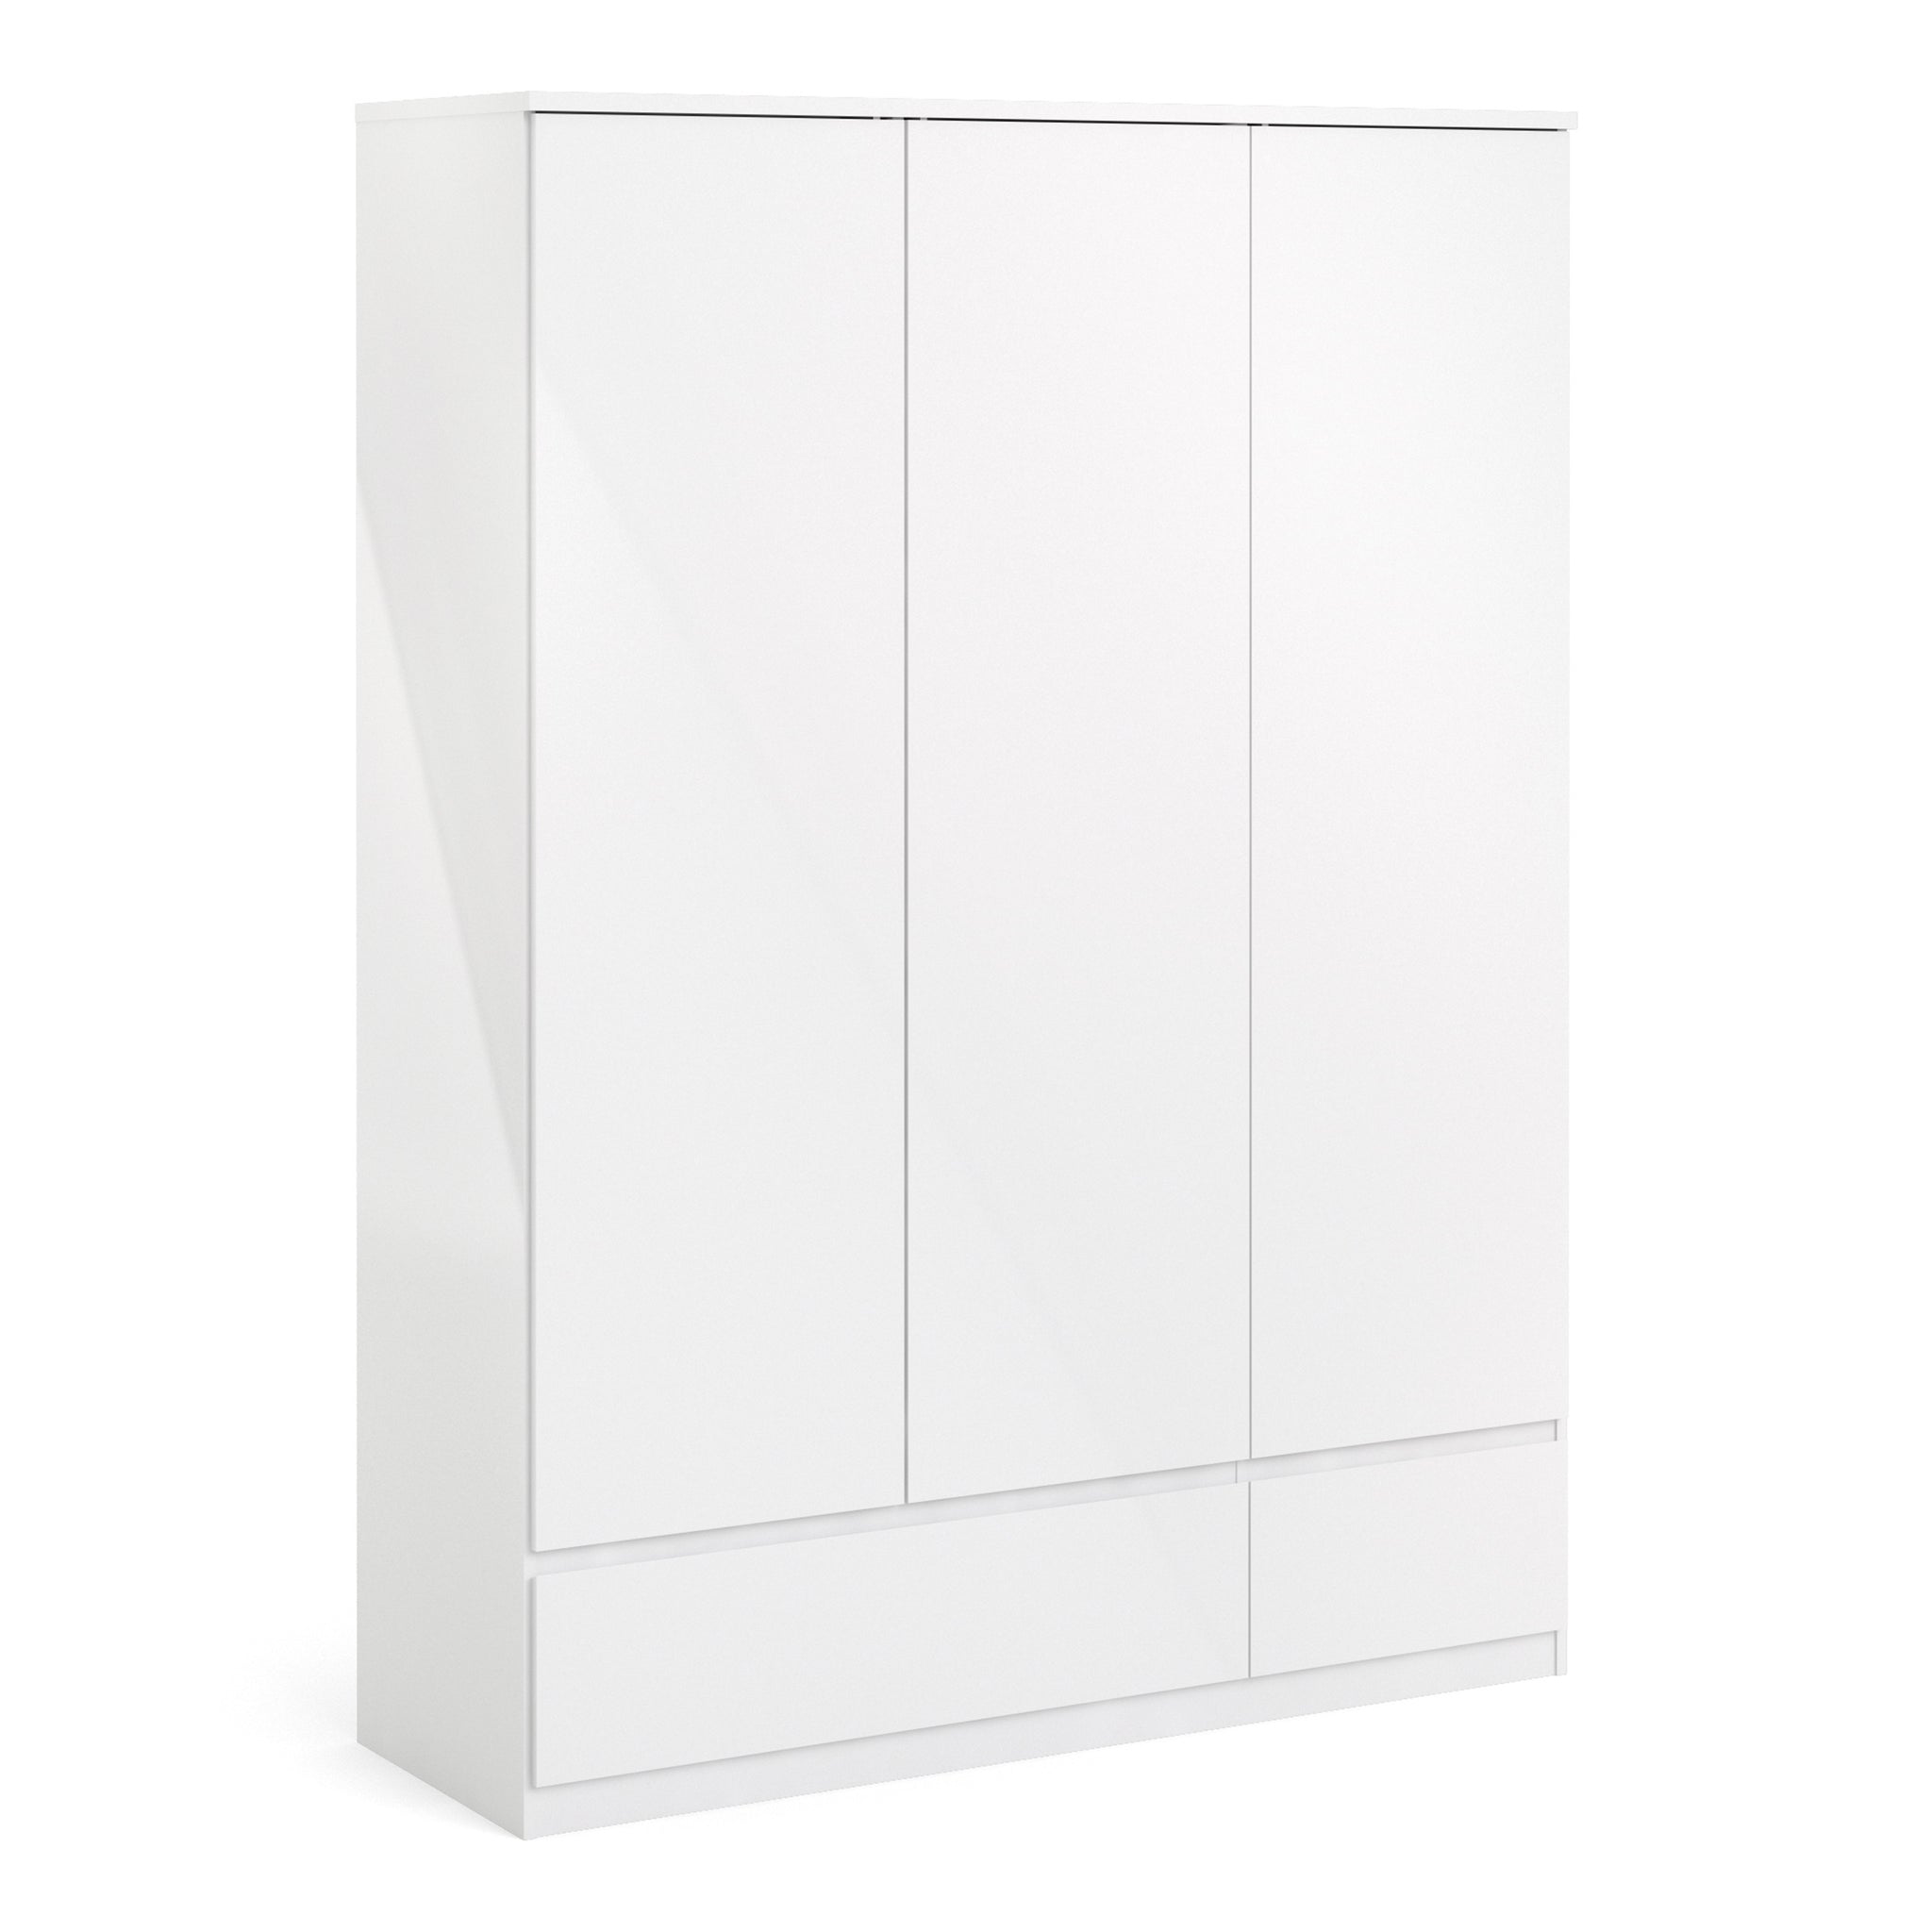 Gaia Wardrobe with 3 doors + 2 drawers in White High Gloss